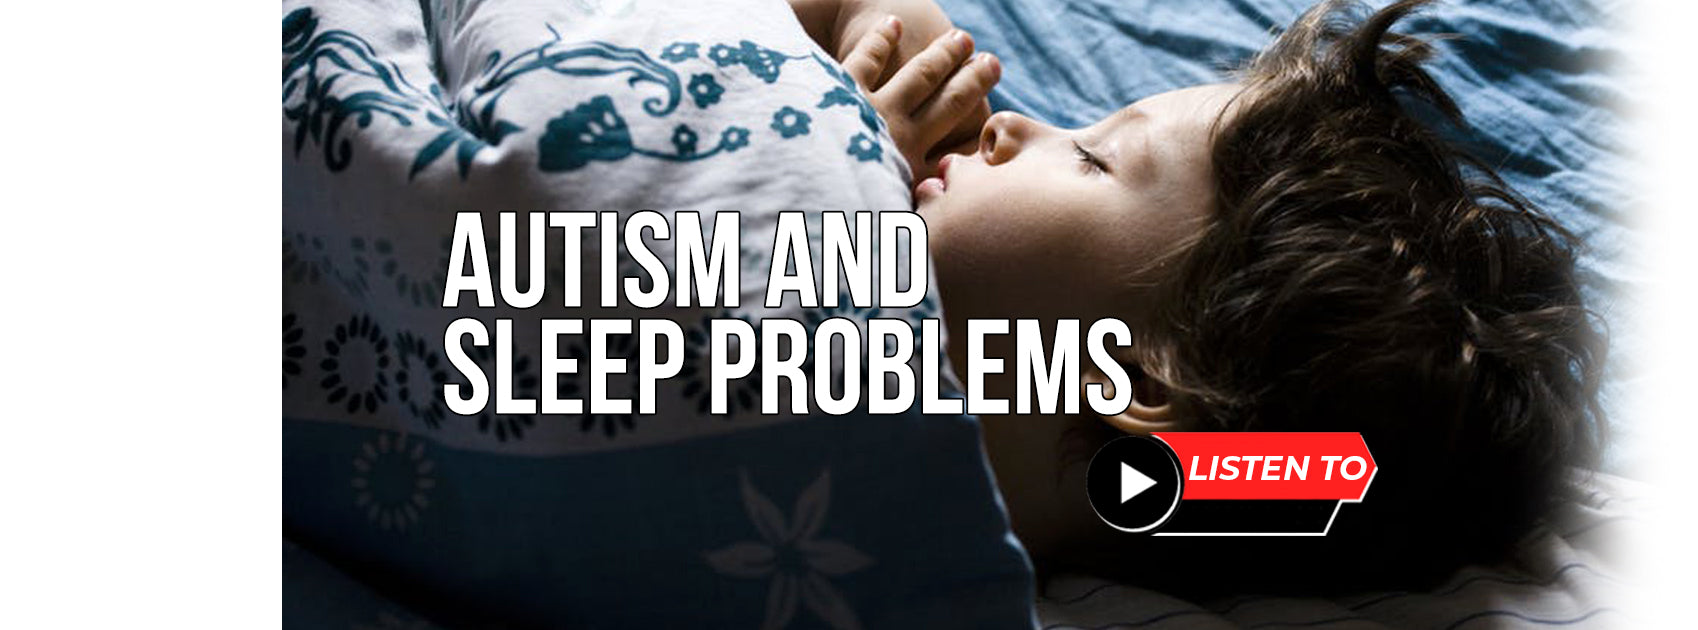 A GUIDE TO AUTISM (ASD) AND SLEEP PROBLEMS